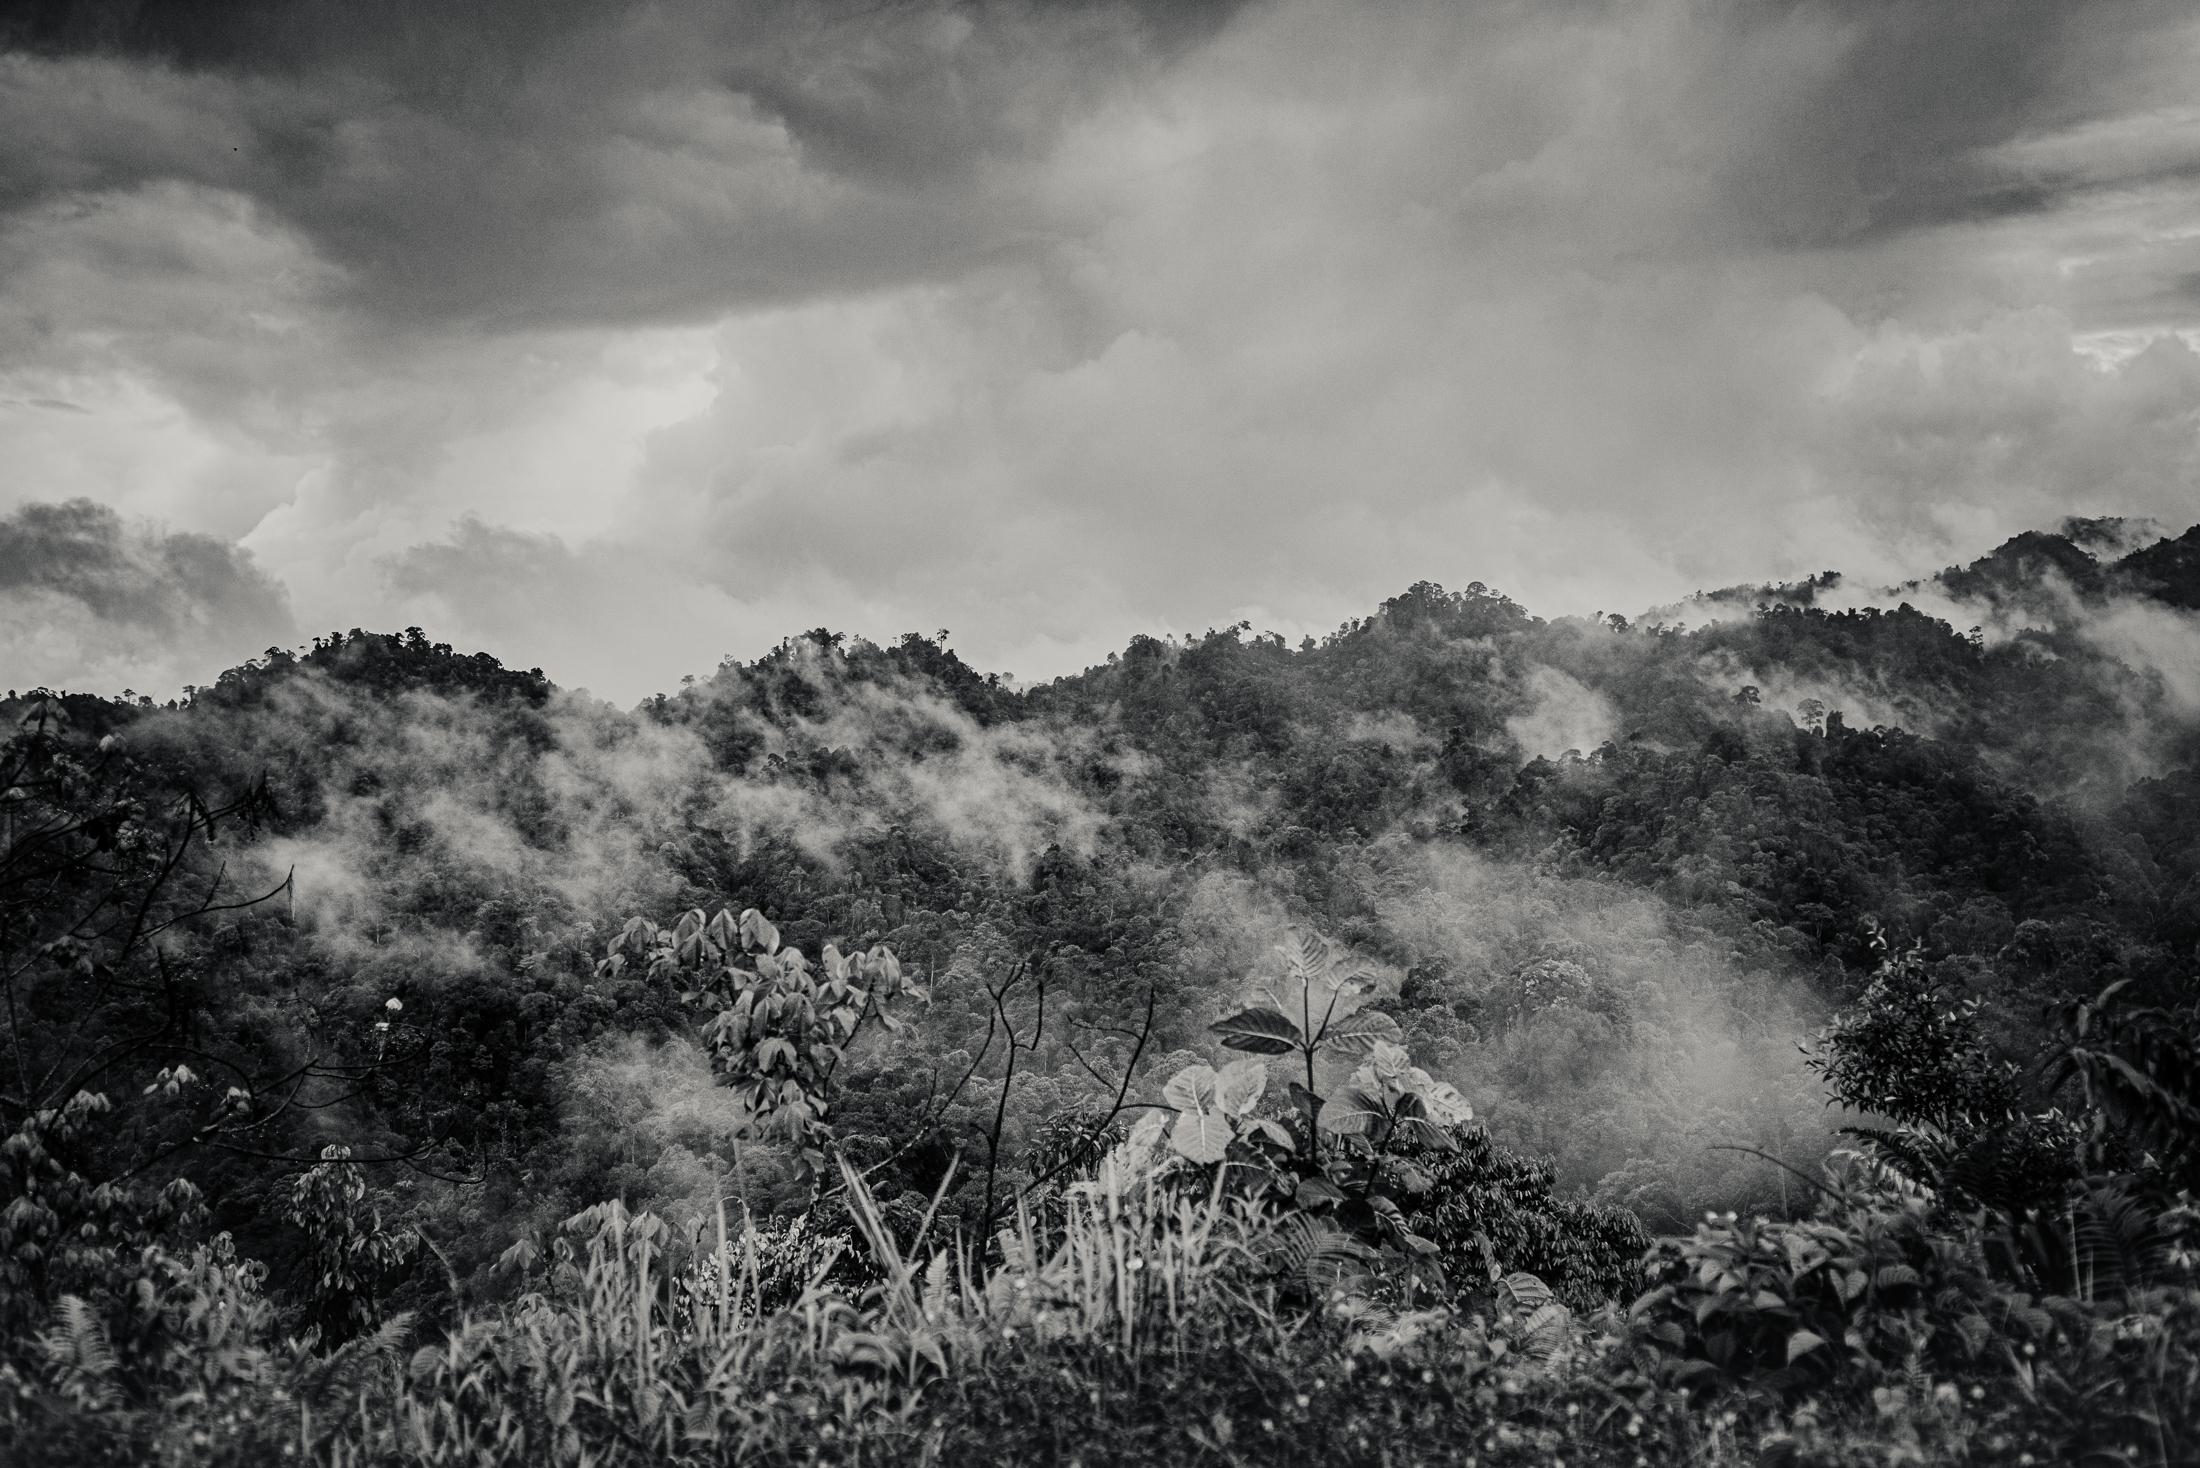 Indigenous Land Rights in Sarawak -  Along a logging road throuugh the jungles of Borneo,...